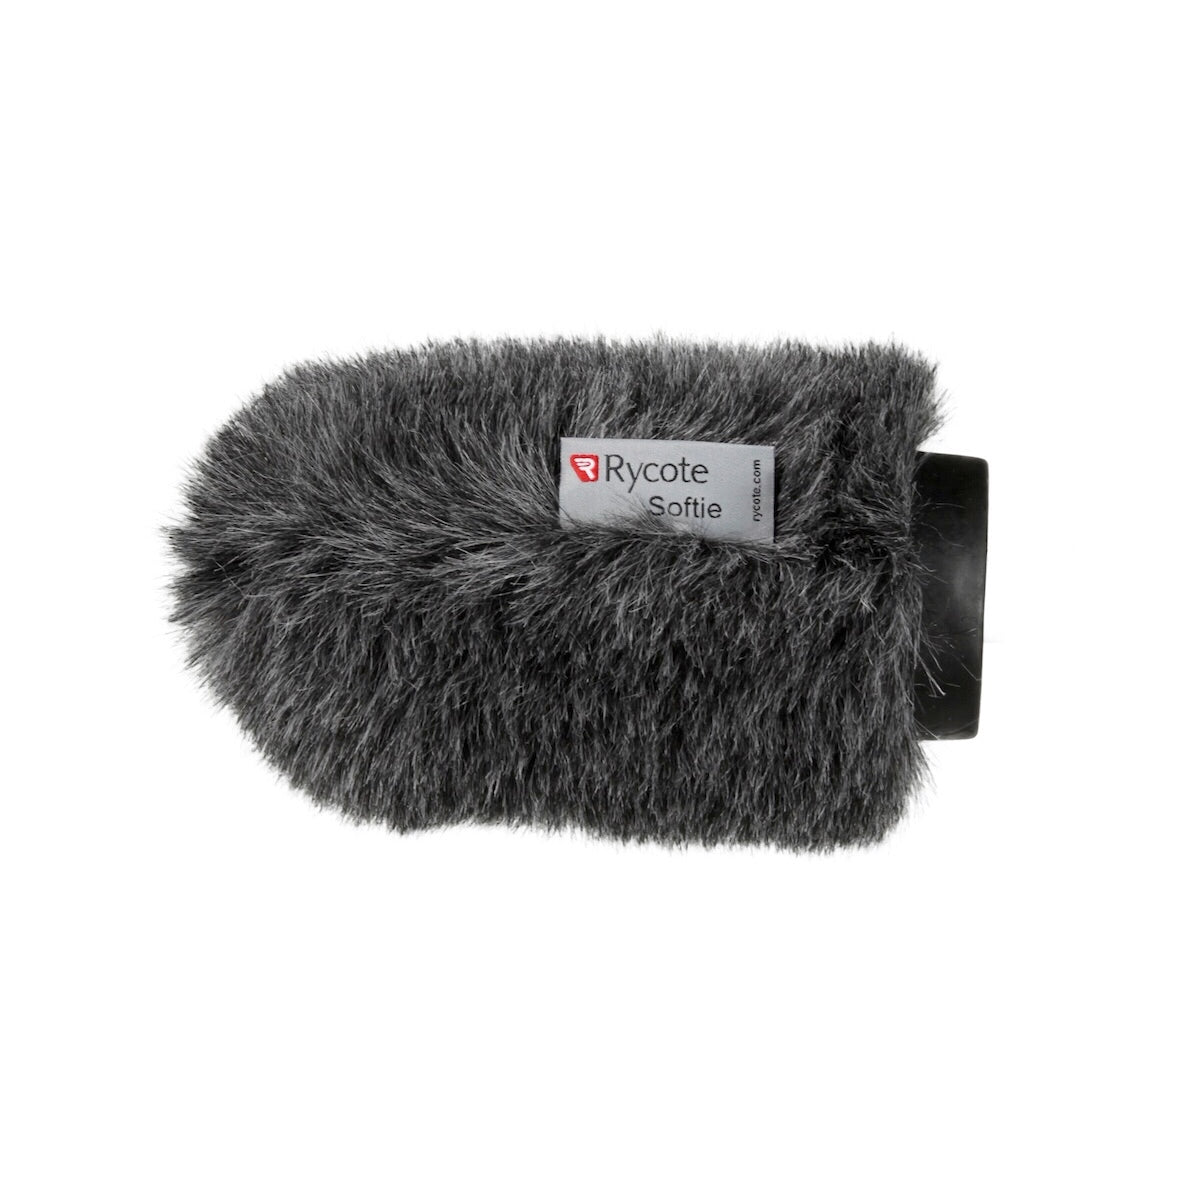 Rycote 12cm Classic-Softie (19/22), Grey, Synthetic Fur Cover, For 19-22mm Diameter Mics